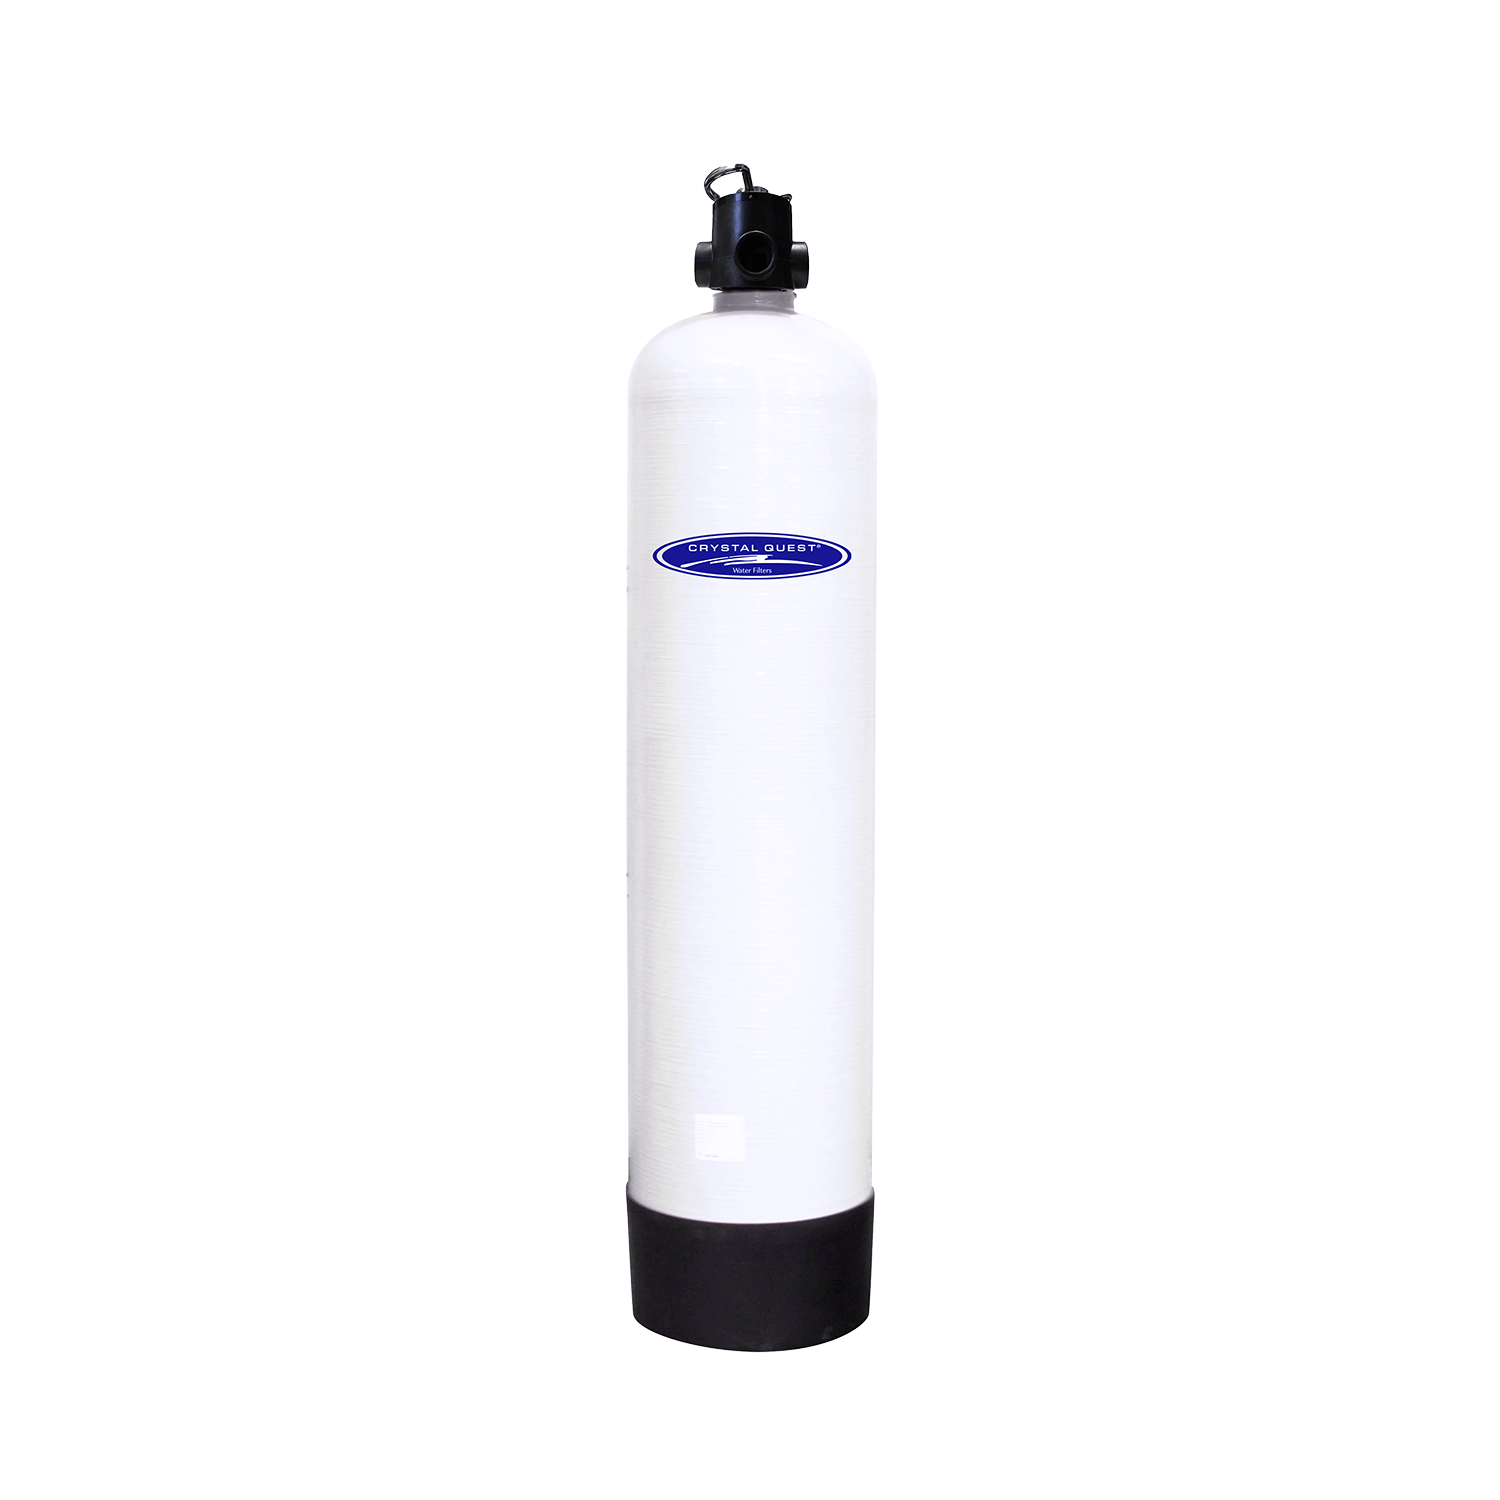 20 GPM / Calcium GAC / Manual (Downflow w/ Backwash) Fluoride Removal Water Filtration System - Commercial - Crystal Quest